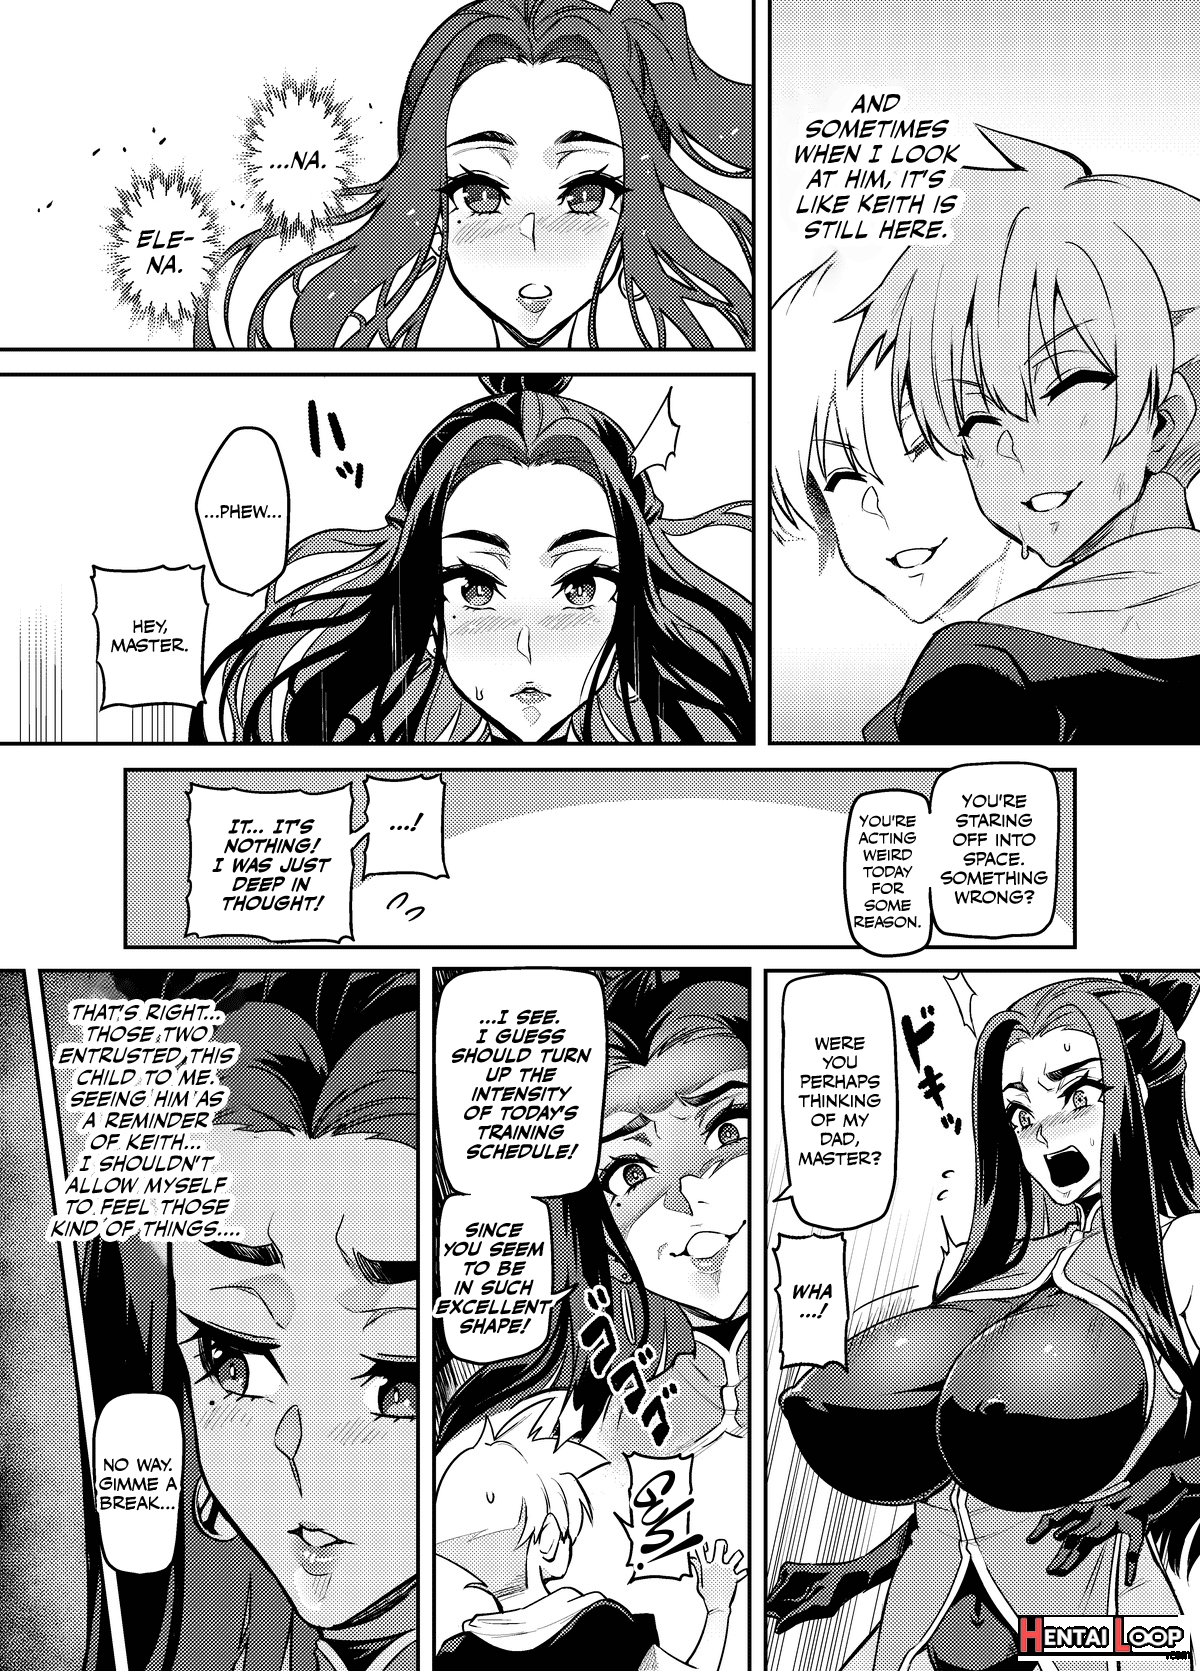 High Wizard Elena ~the Witch Who Fell In Love With The Child Entrusted To Her By Her Past Sweetheart~ Chapter 1, 3-5 page 5